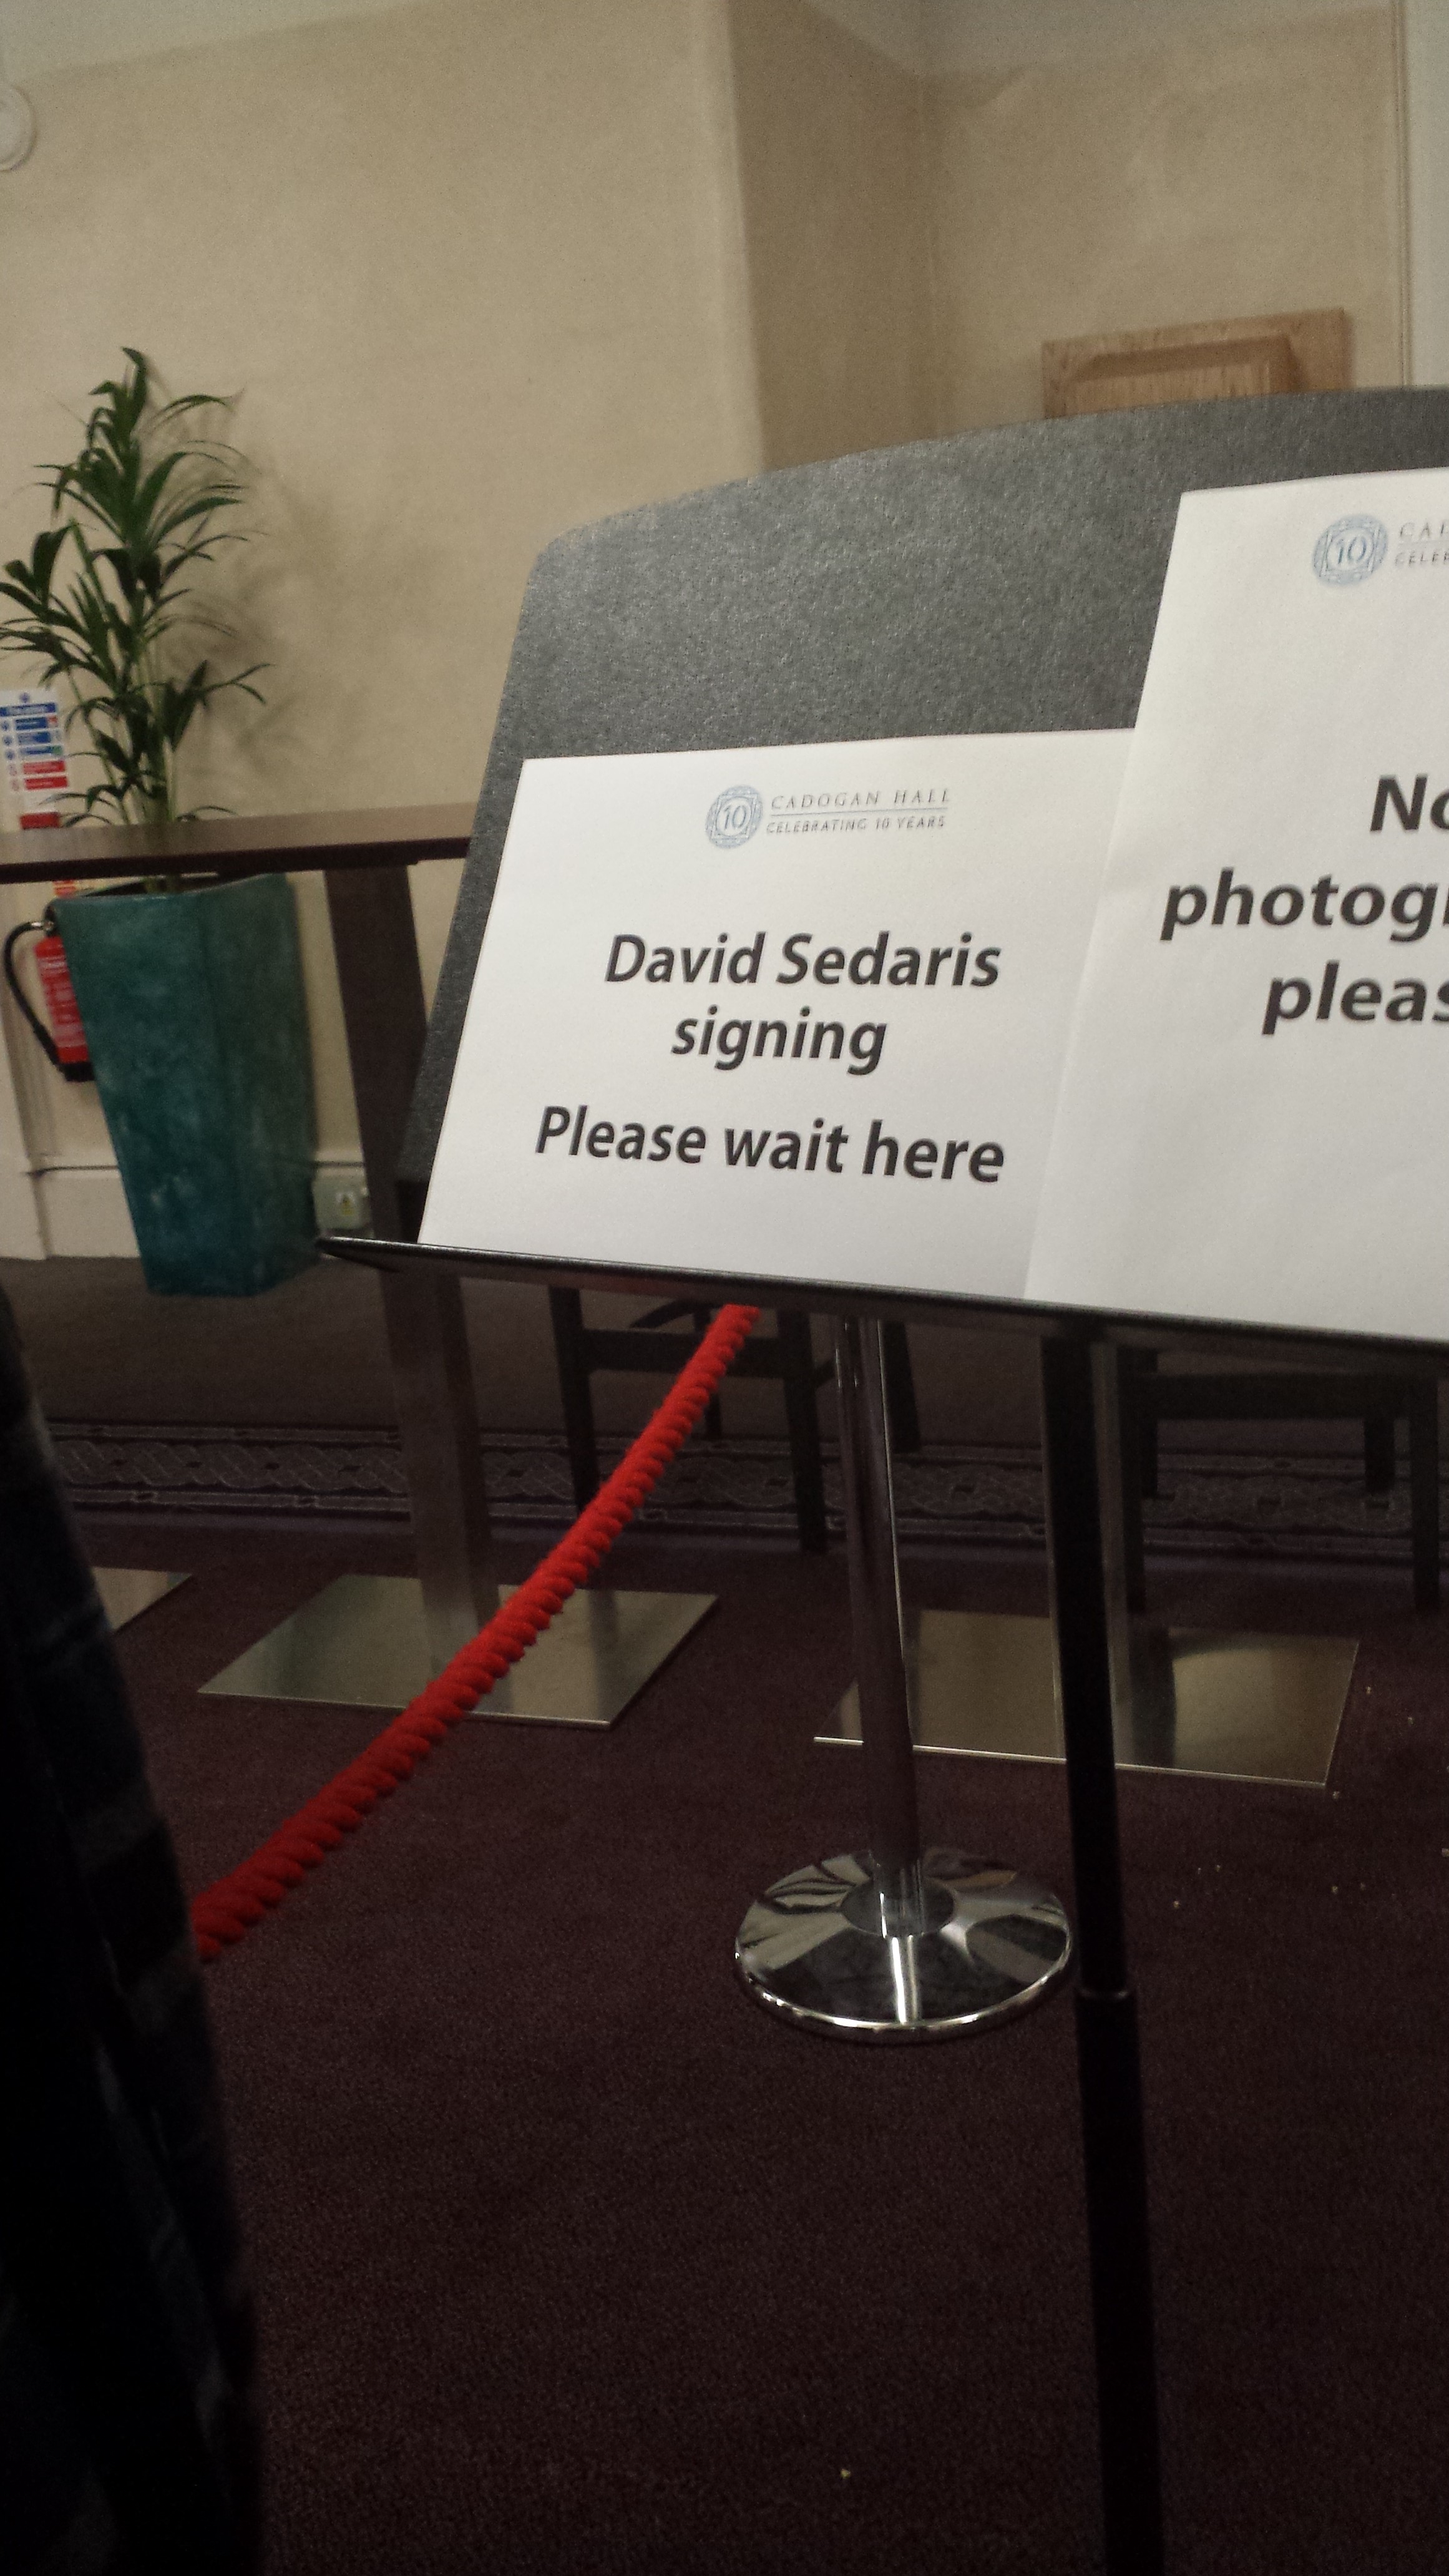 No photographs were allowed, but I was feeling rebellious...